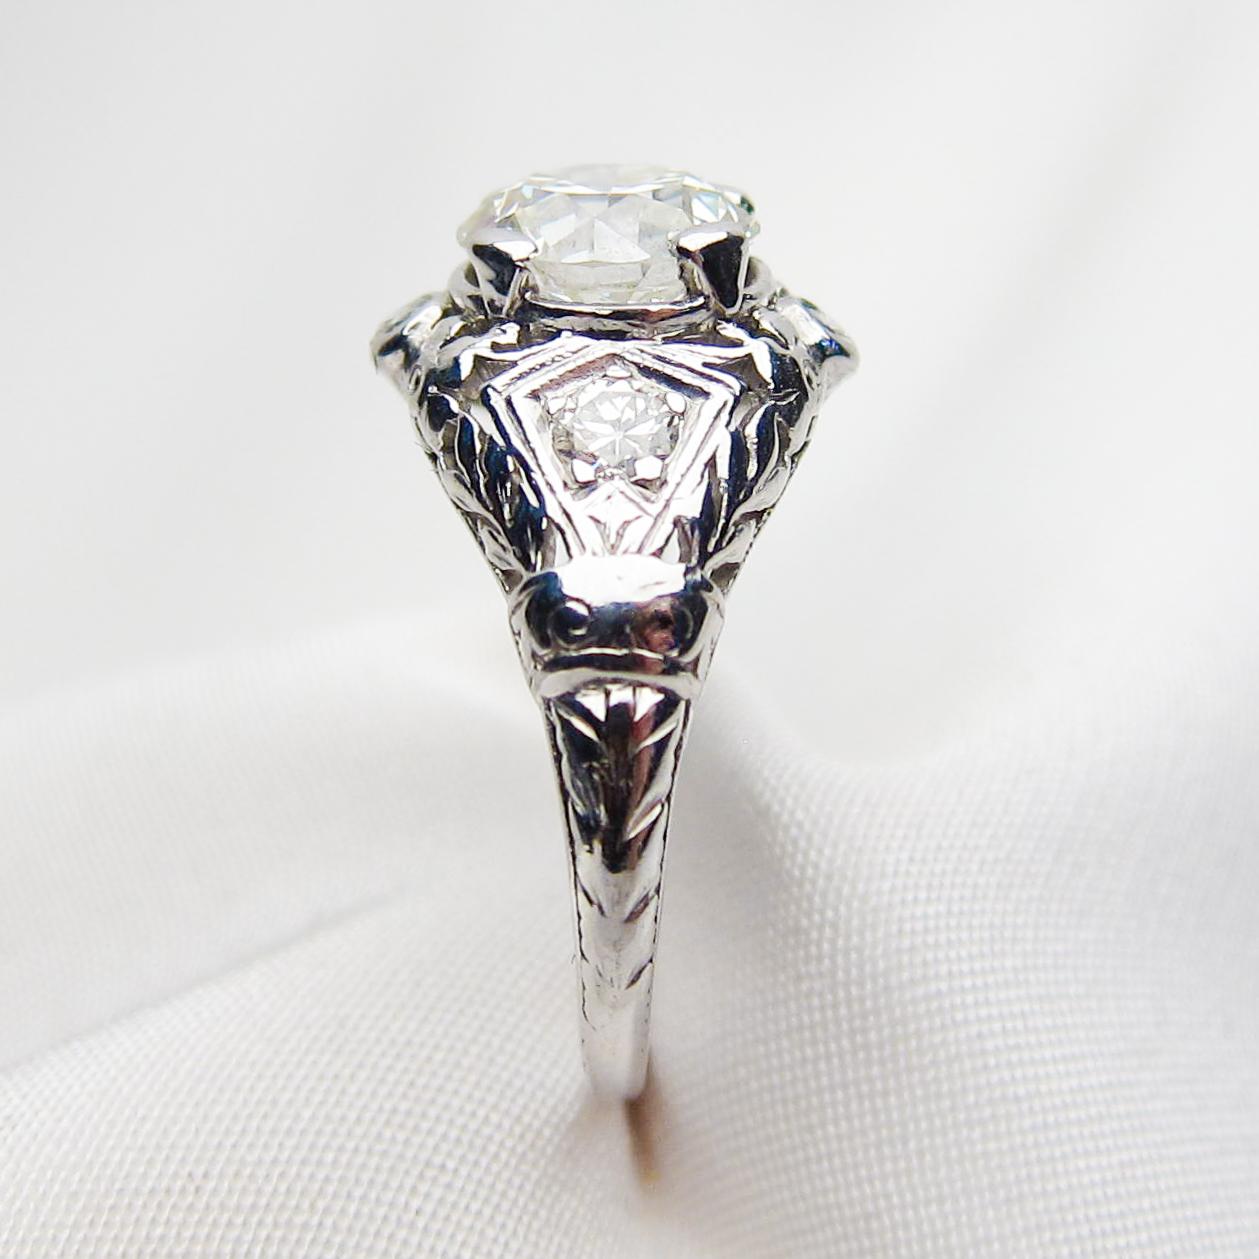 Art Deco Era 1.74 Ct Transitional-Cut Diamond Platinum Filigree Engagement Ring In Excellent Condition For Sale In Seattle, WA